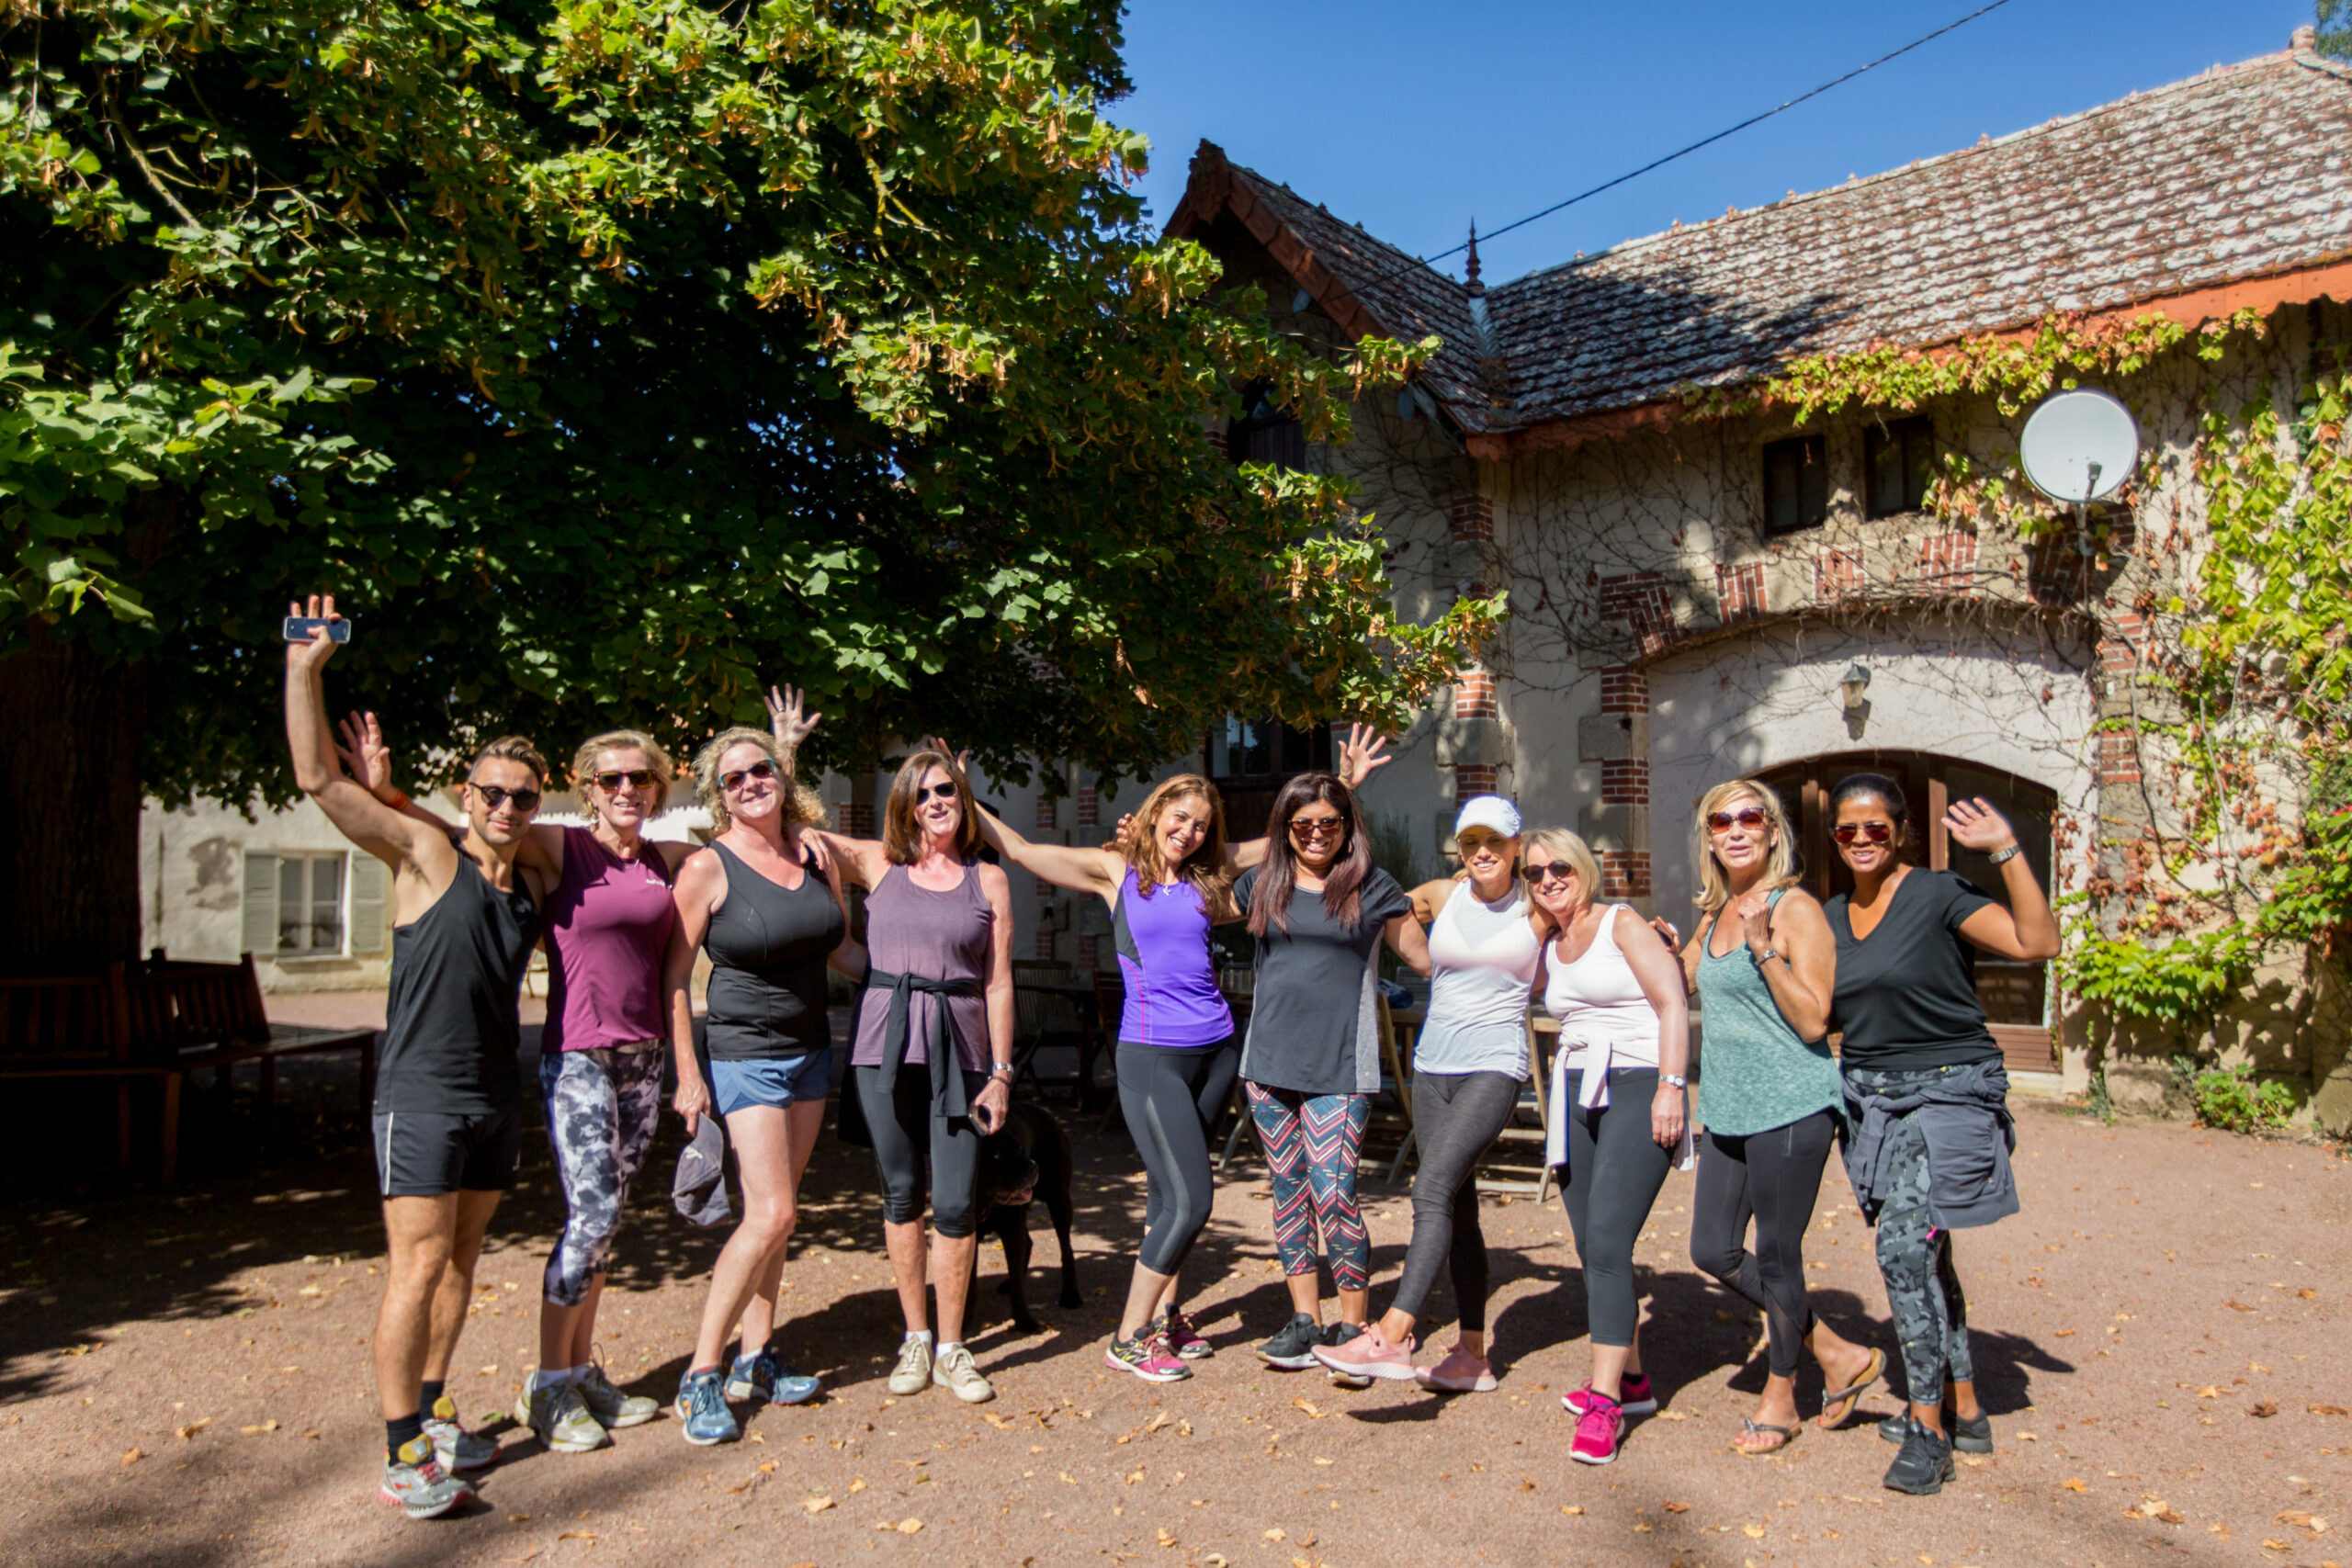 Yoga retreat 2022 in the Loire Valley France, with leading UK nutritionist May Simpkin